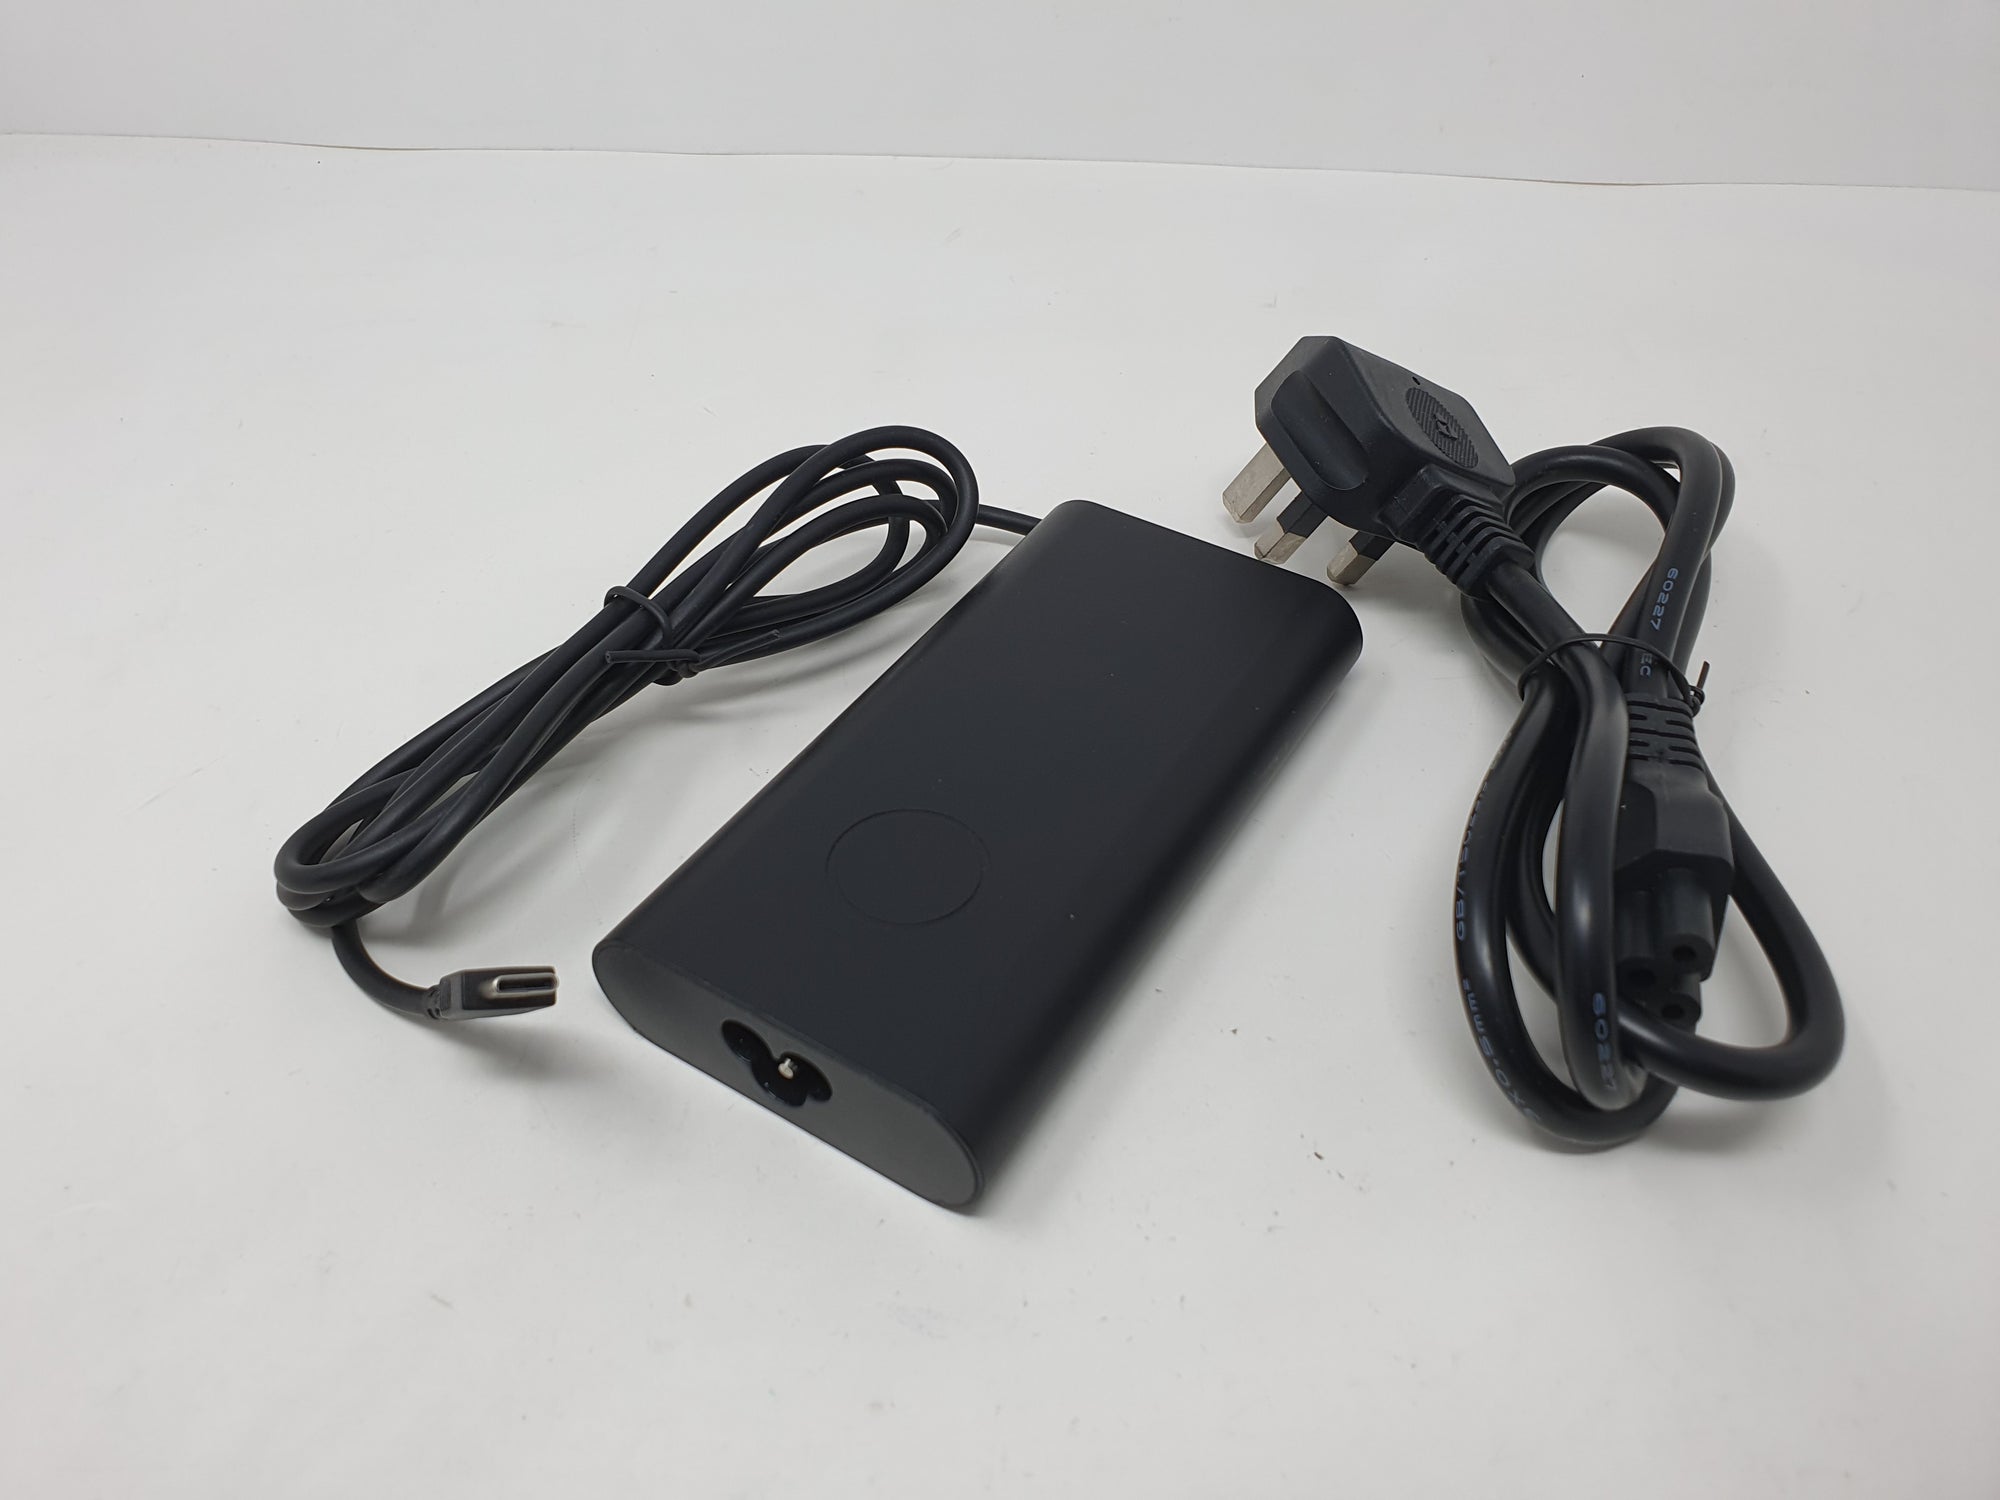 USB C Type-C Laptop Charger Power Supply Adapter for Lenovo Laptop